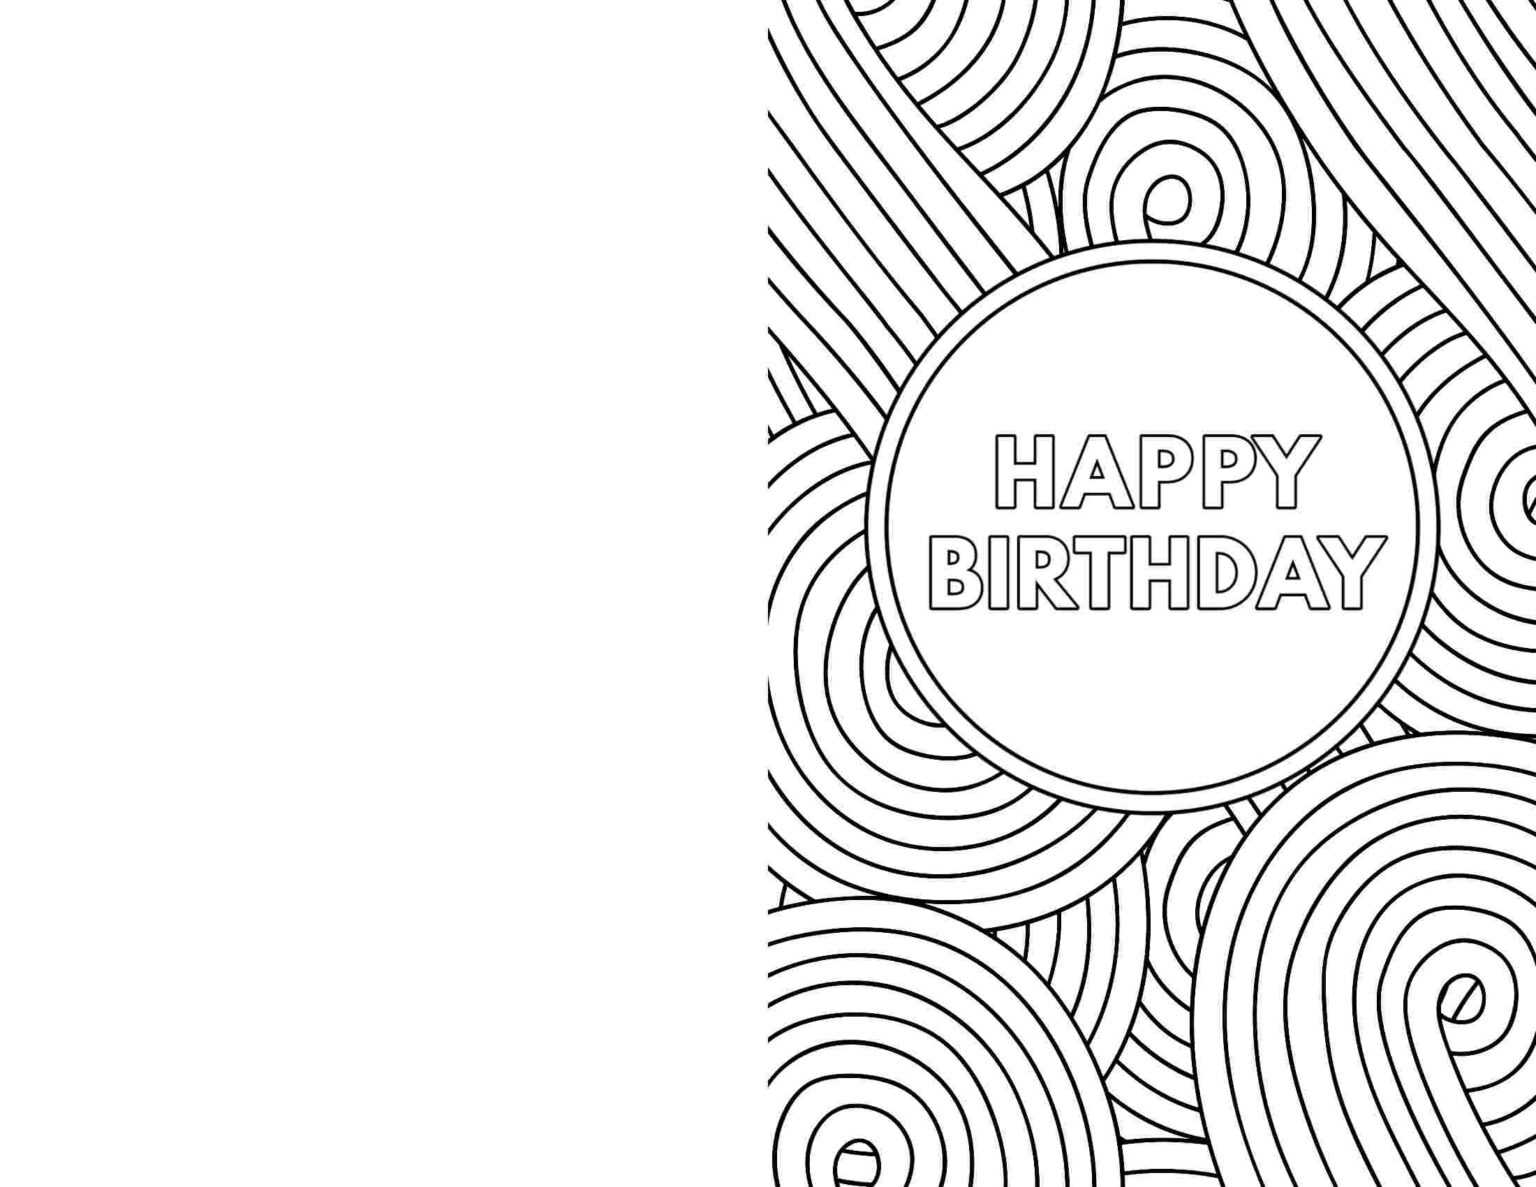 coloring-printable-coloring-birthday-cards-happy-colouring-with-mom